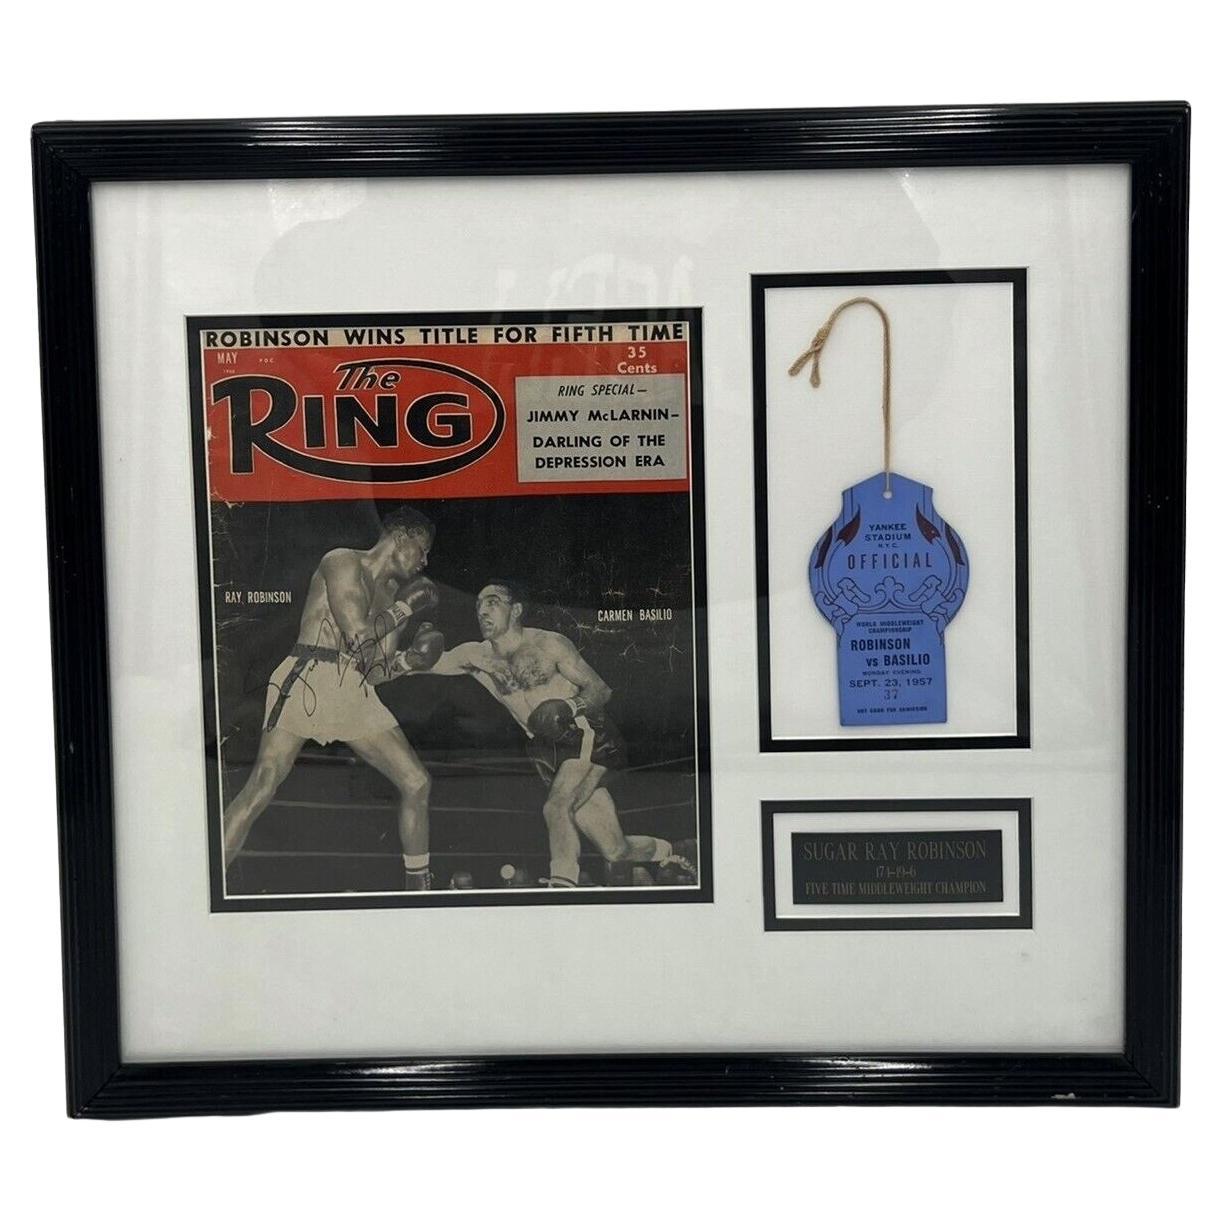 Sugar Ray Robinson Autographed Display and 1957 Yankee Stadium Tag For Sale